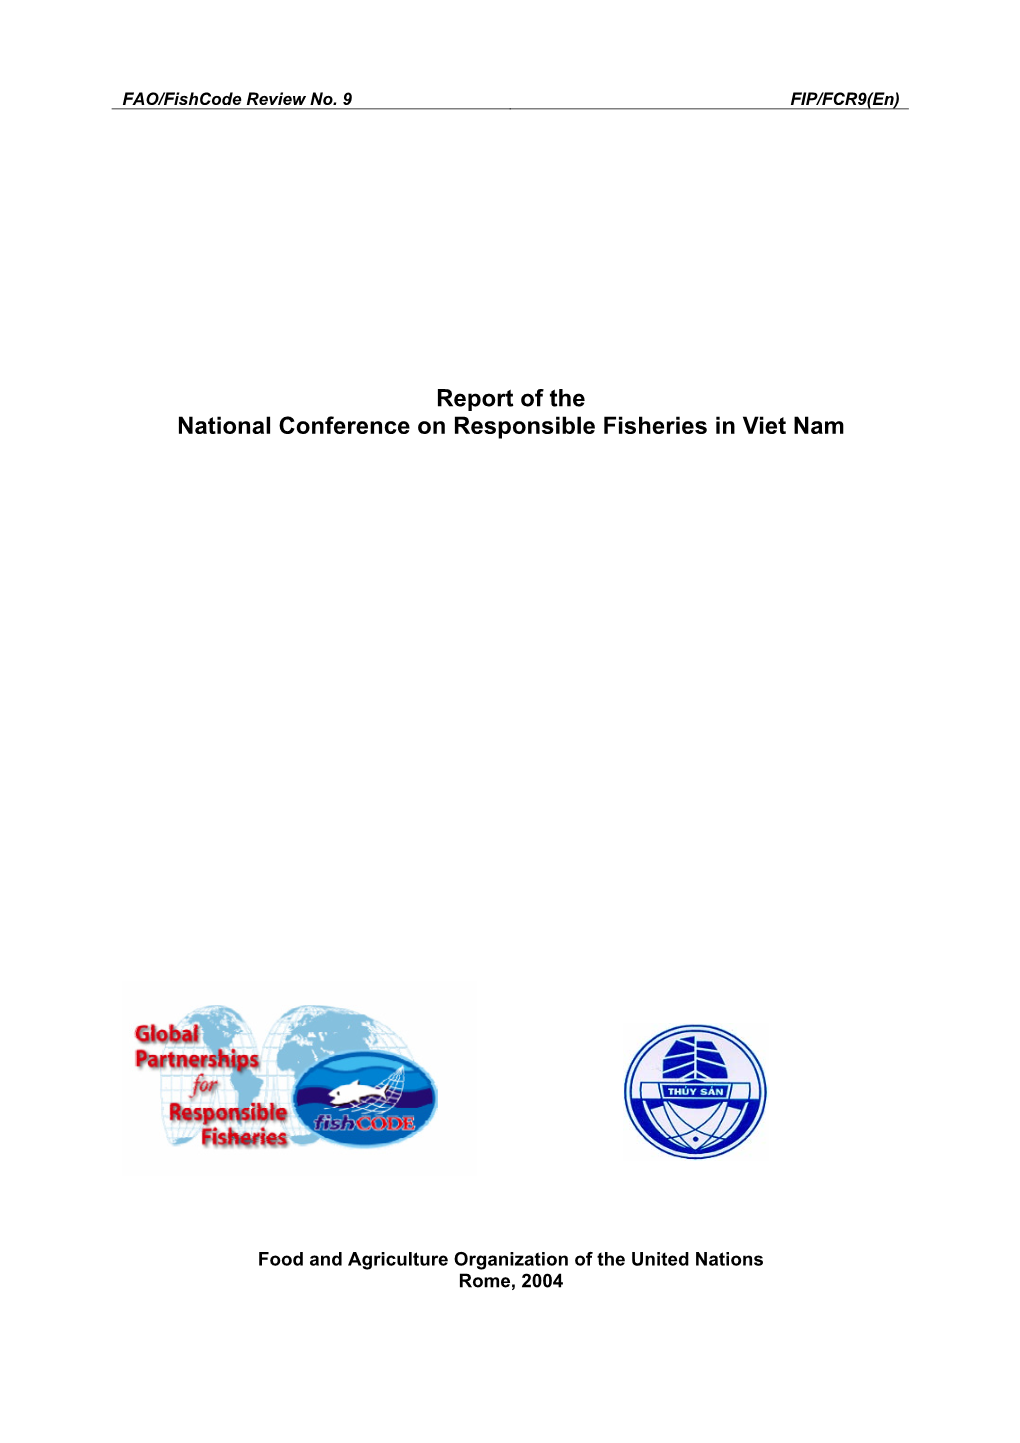 Report of the National Conference on Responsible Fisheries in Viet Nam